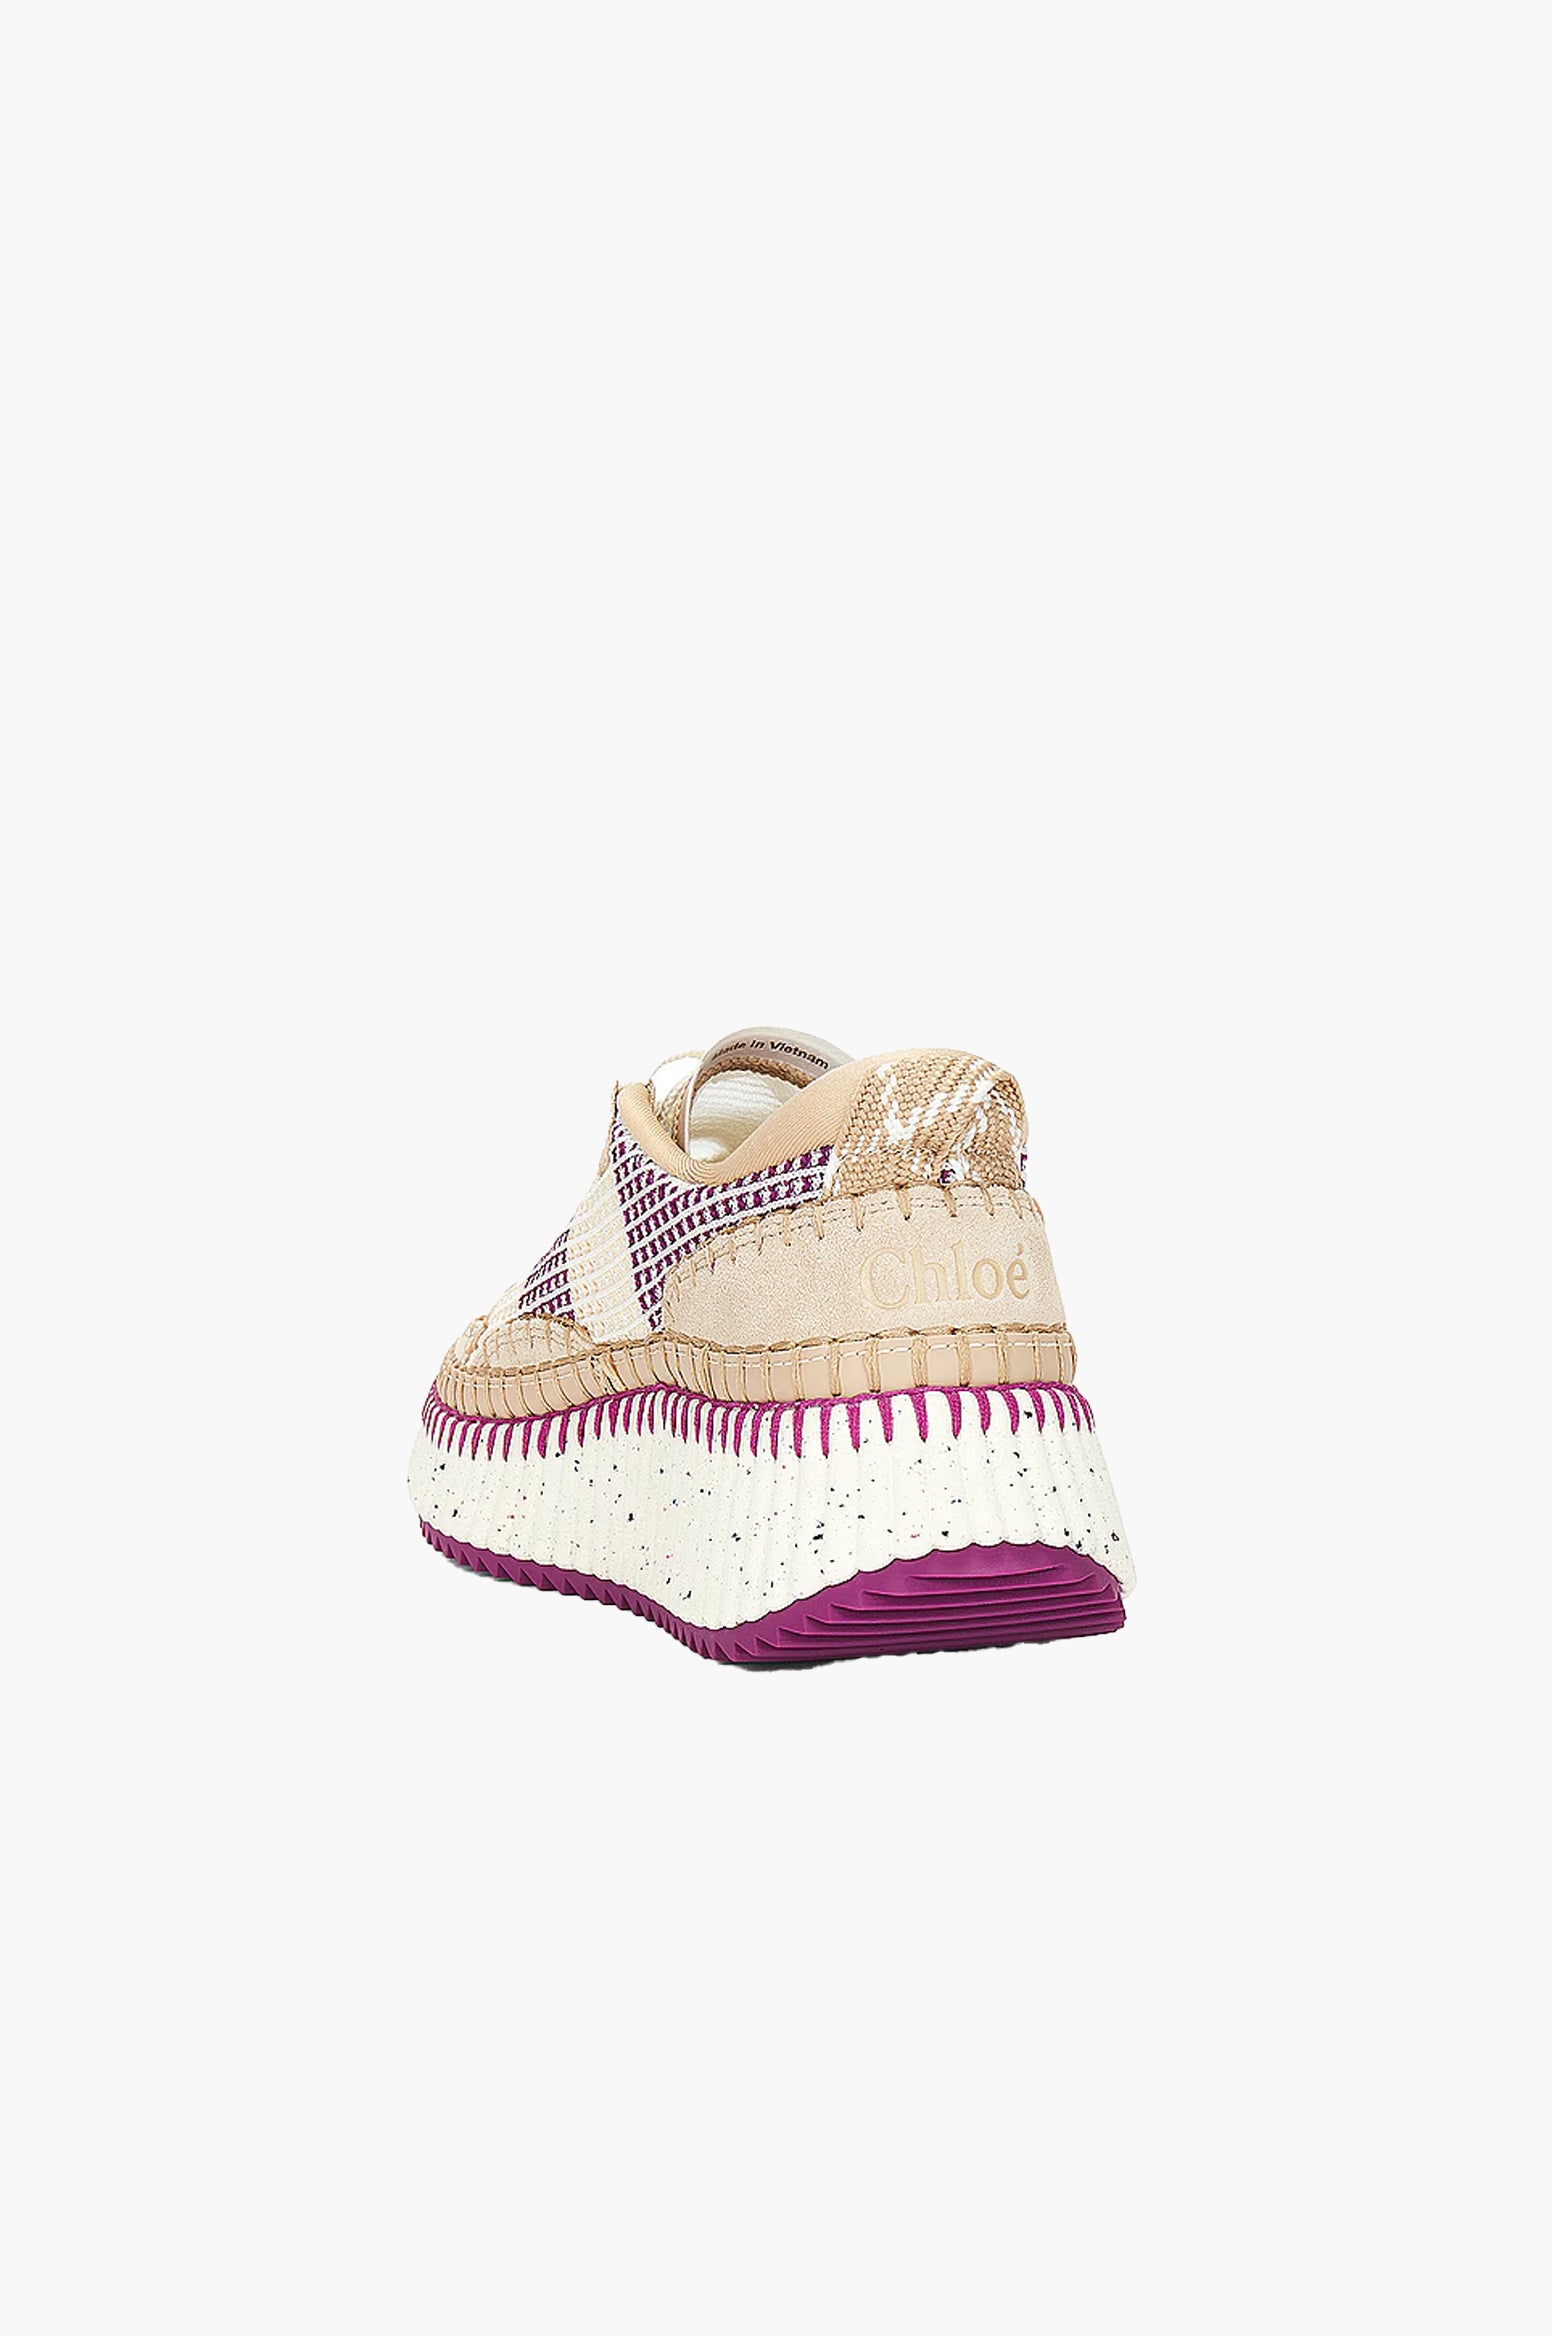 CHLOÉ Nama Sneaker in Wild Purple available at The New Trend Australia